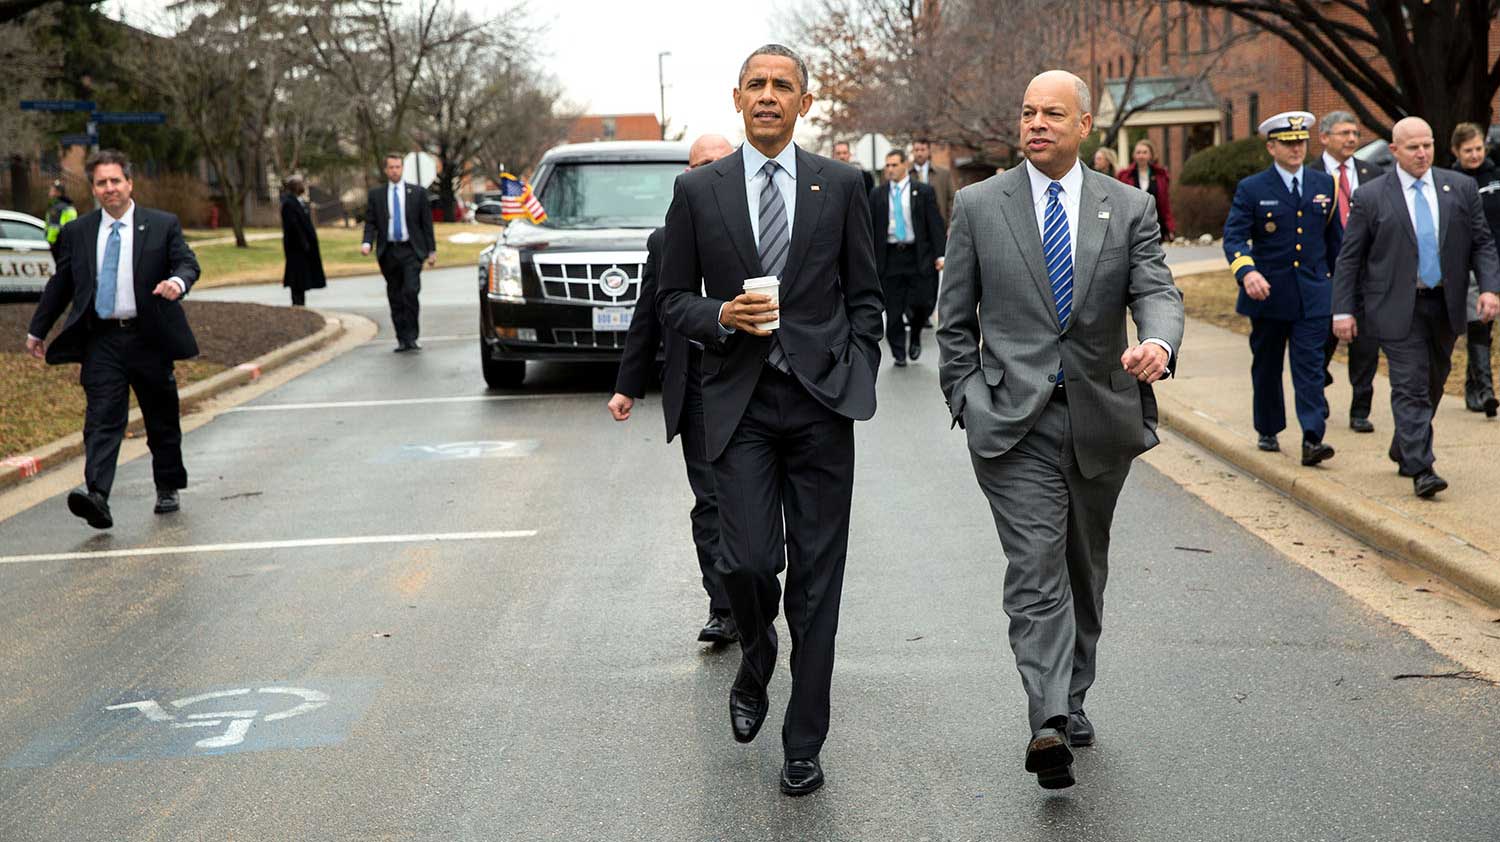 Jeh Johnson (right) Secretary of Homeland Security in the Obama Administration, critiqued presentations by Vassar students in a seminar this spring.